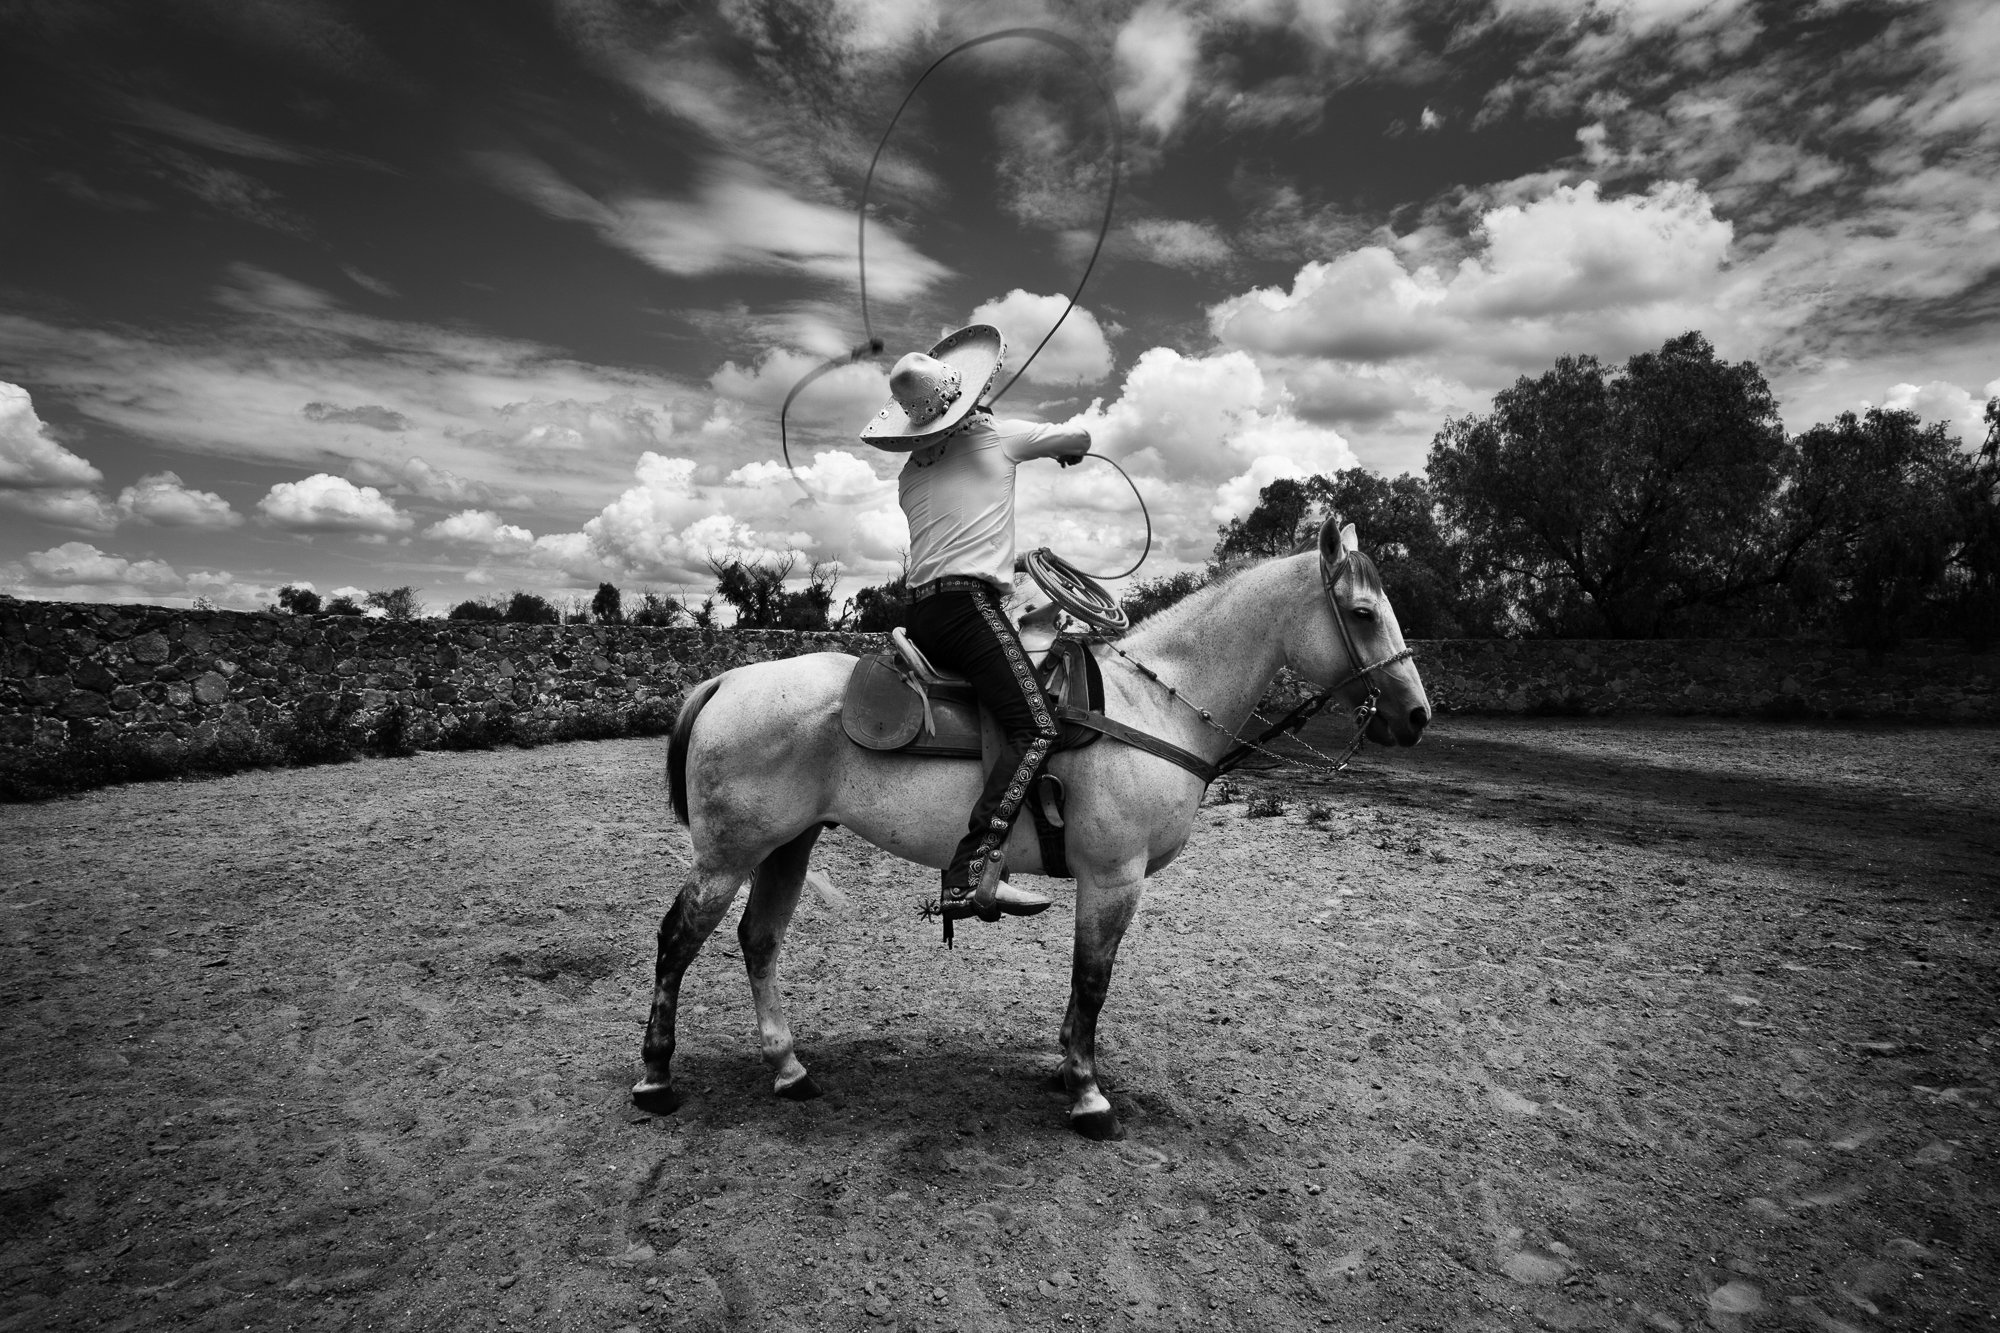 Nicole Franco's action shot of a Charro and his horse. The man faces away from the camera and works a lasso